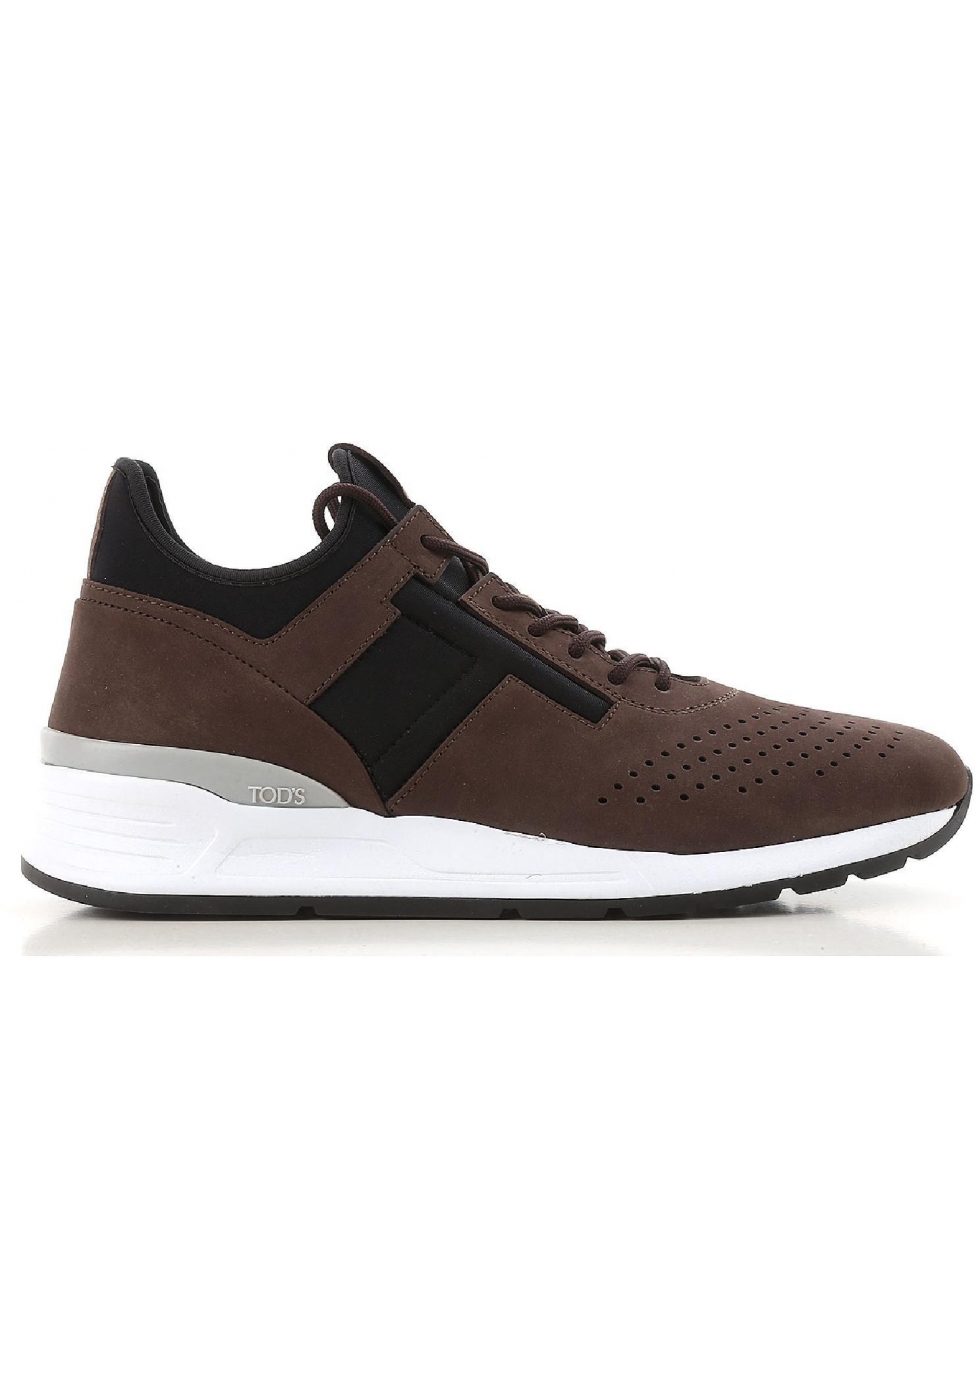 Tod's men's laser cut sneakers shoes in brown leather - Italian Boutique